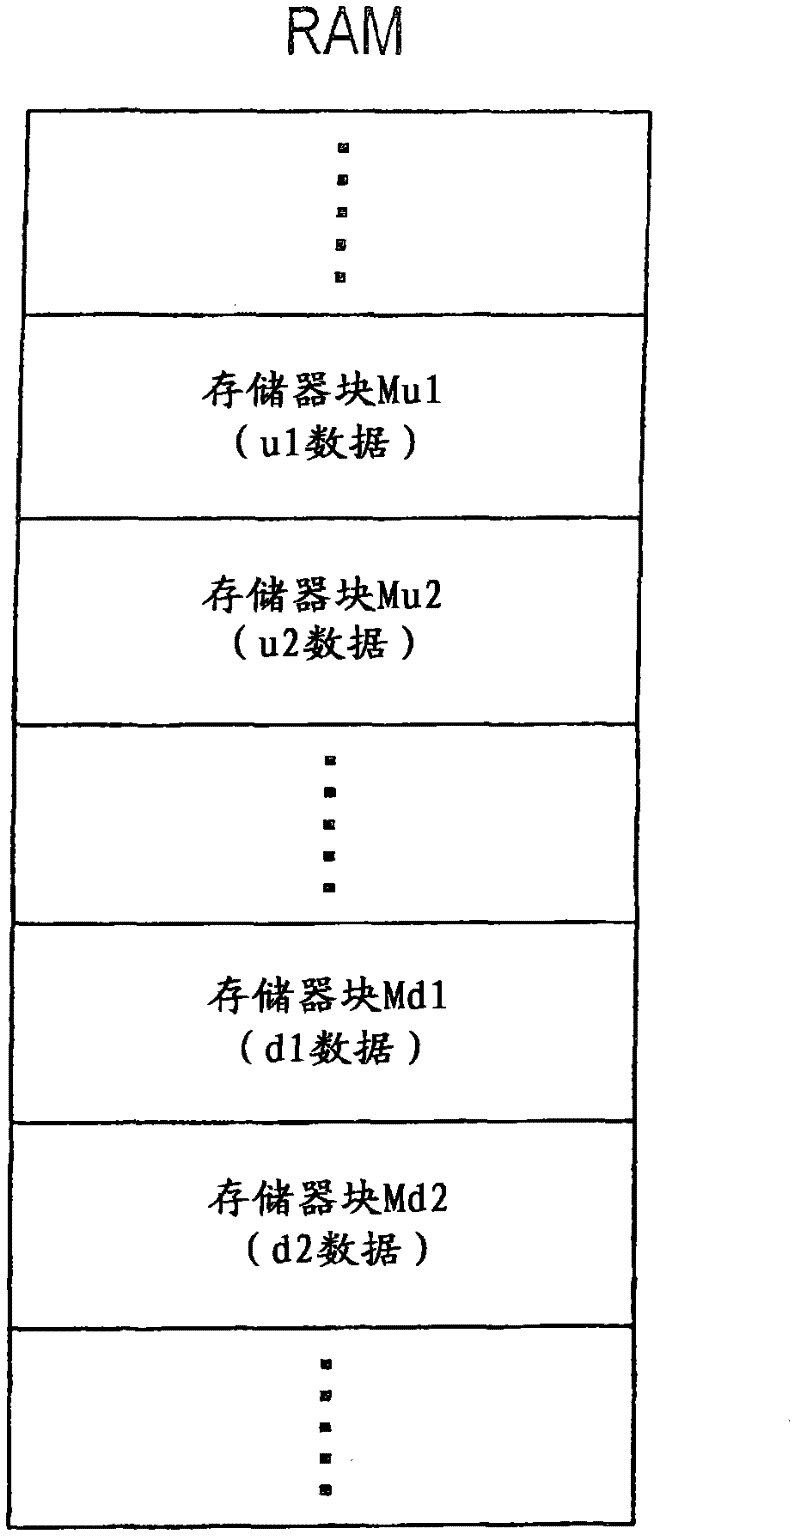 Fmcw radar apparatus having a plurality of processor cores used for signal processing